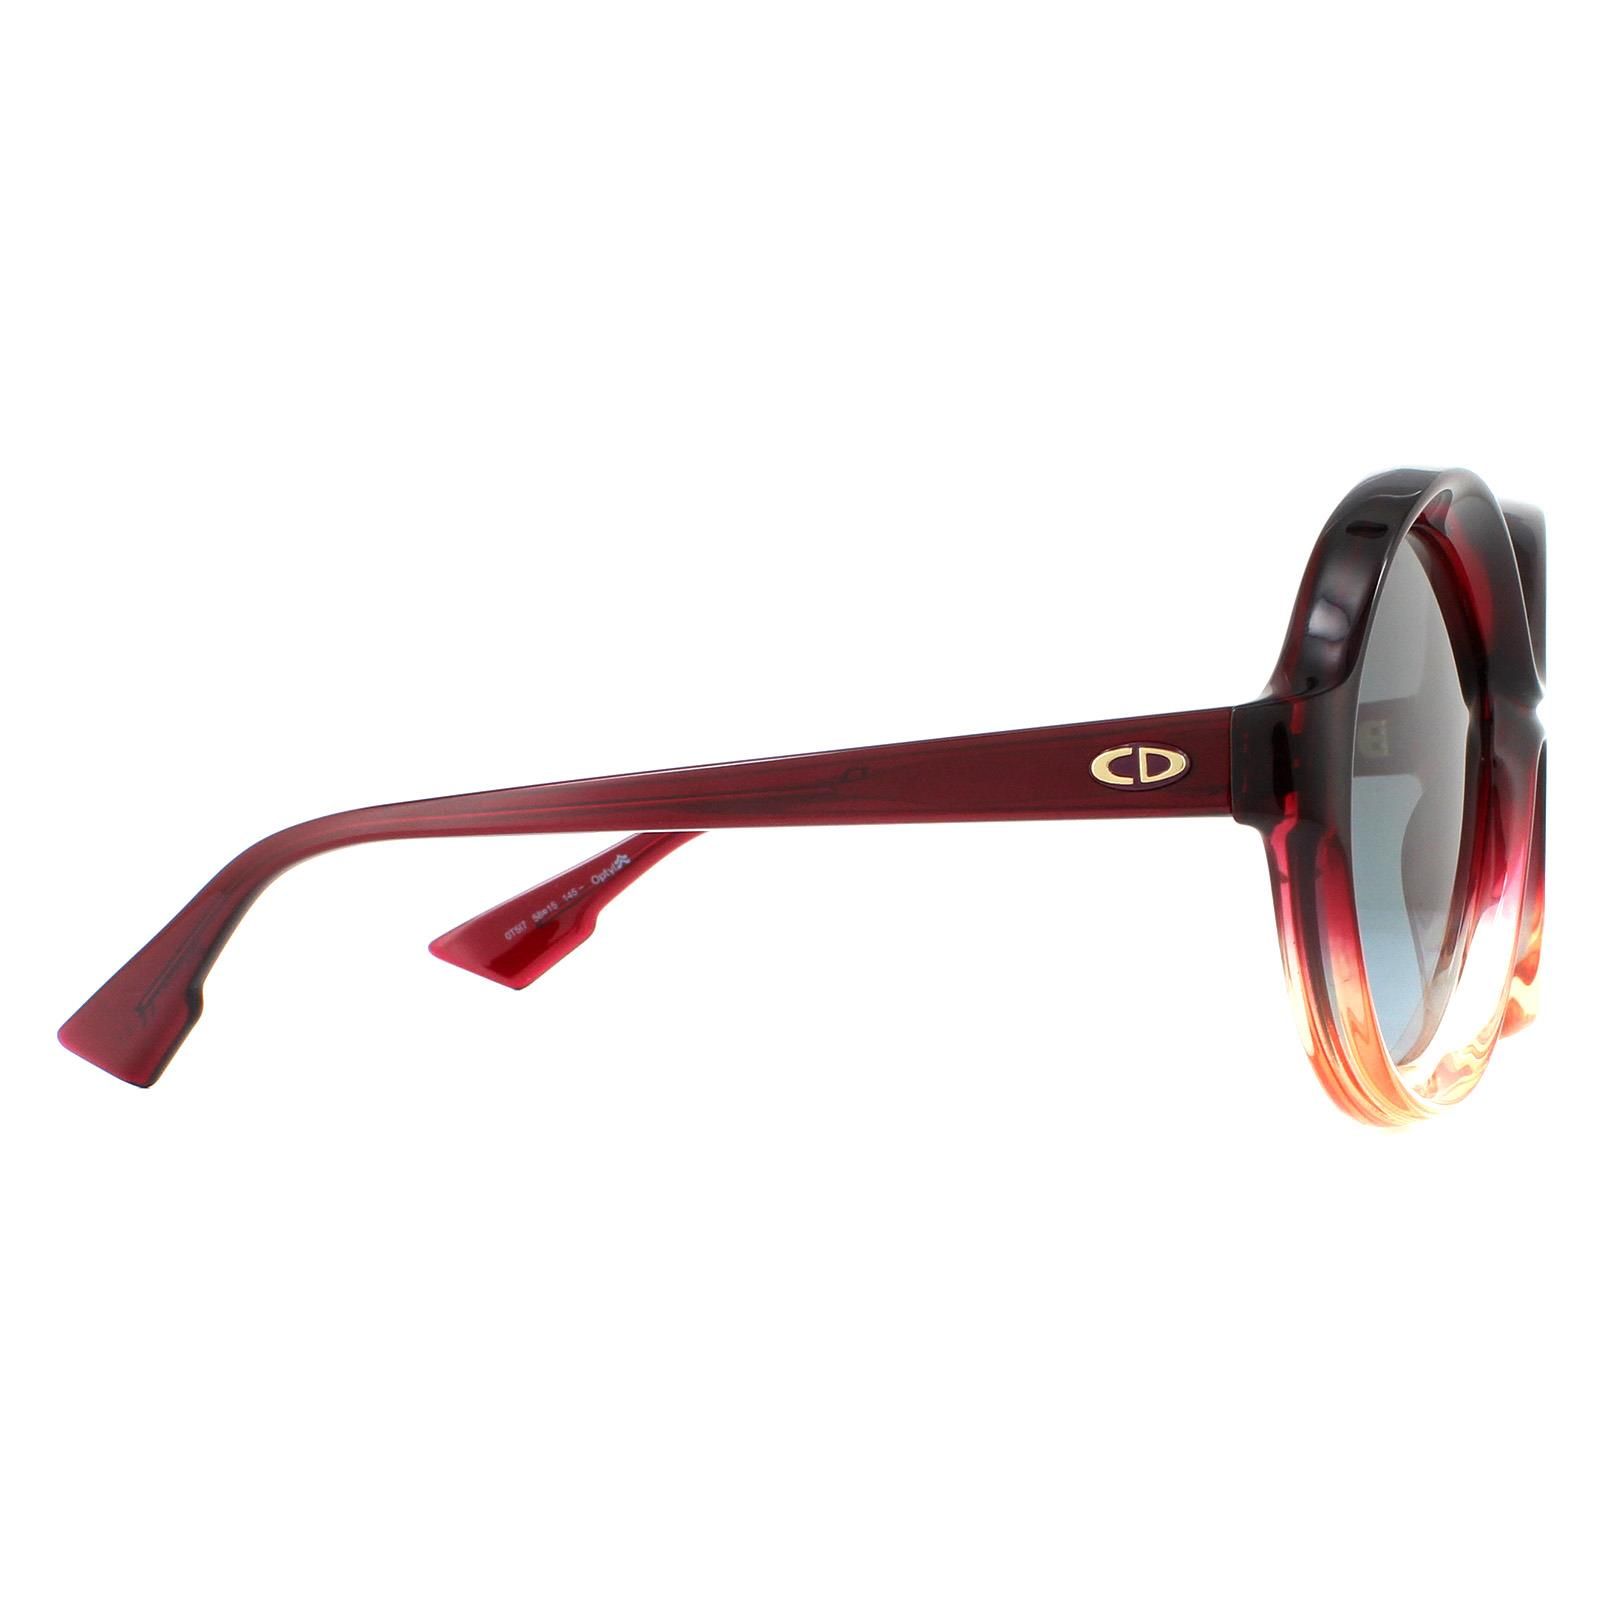 Dior Sunglasses Bianca 0T5 I7 Burgandy-Pink Grey Petrol Gradient are a modern round style, crafted from lightweight acetate.  The frame is lightweight and durable ensuring a comfortable all day wear with the CD logo presented on the temples.